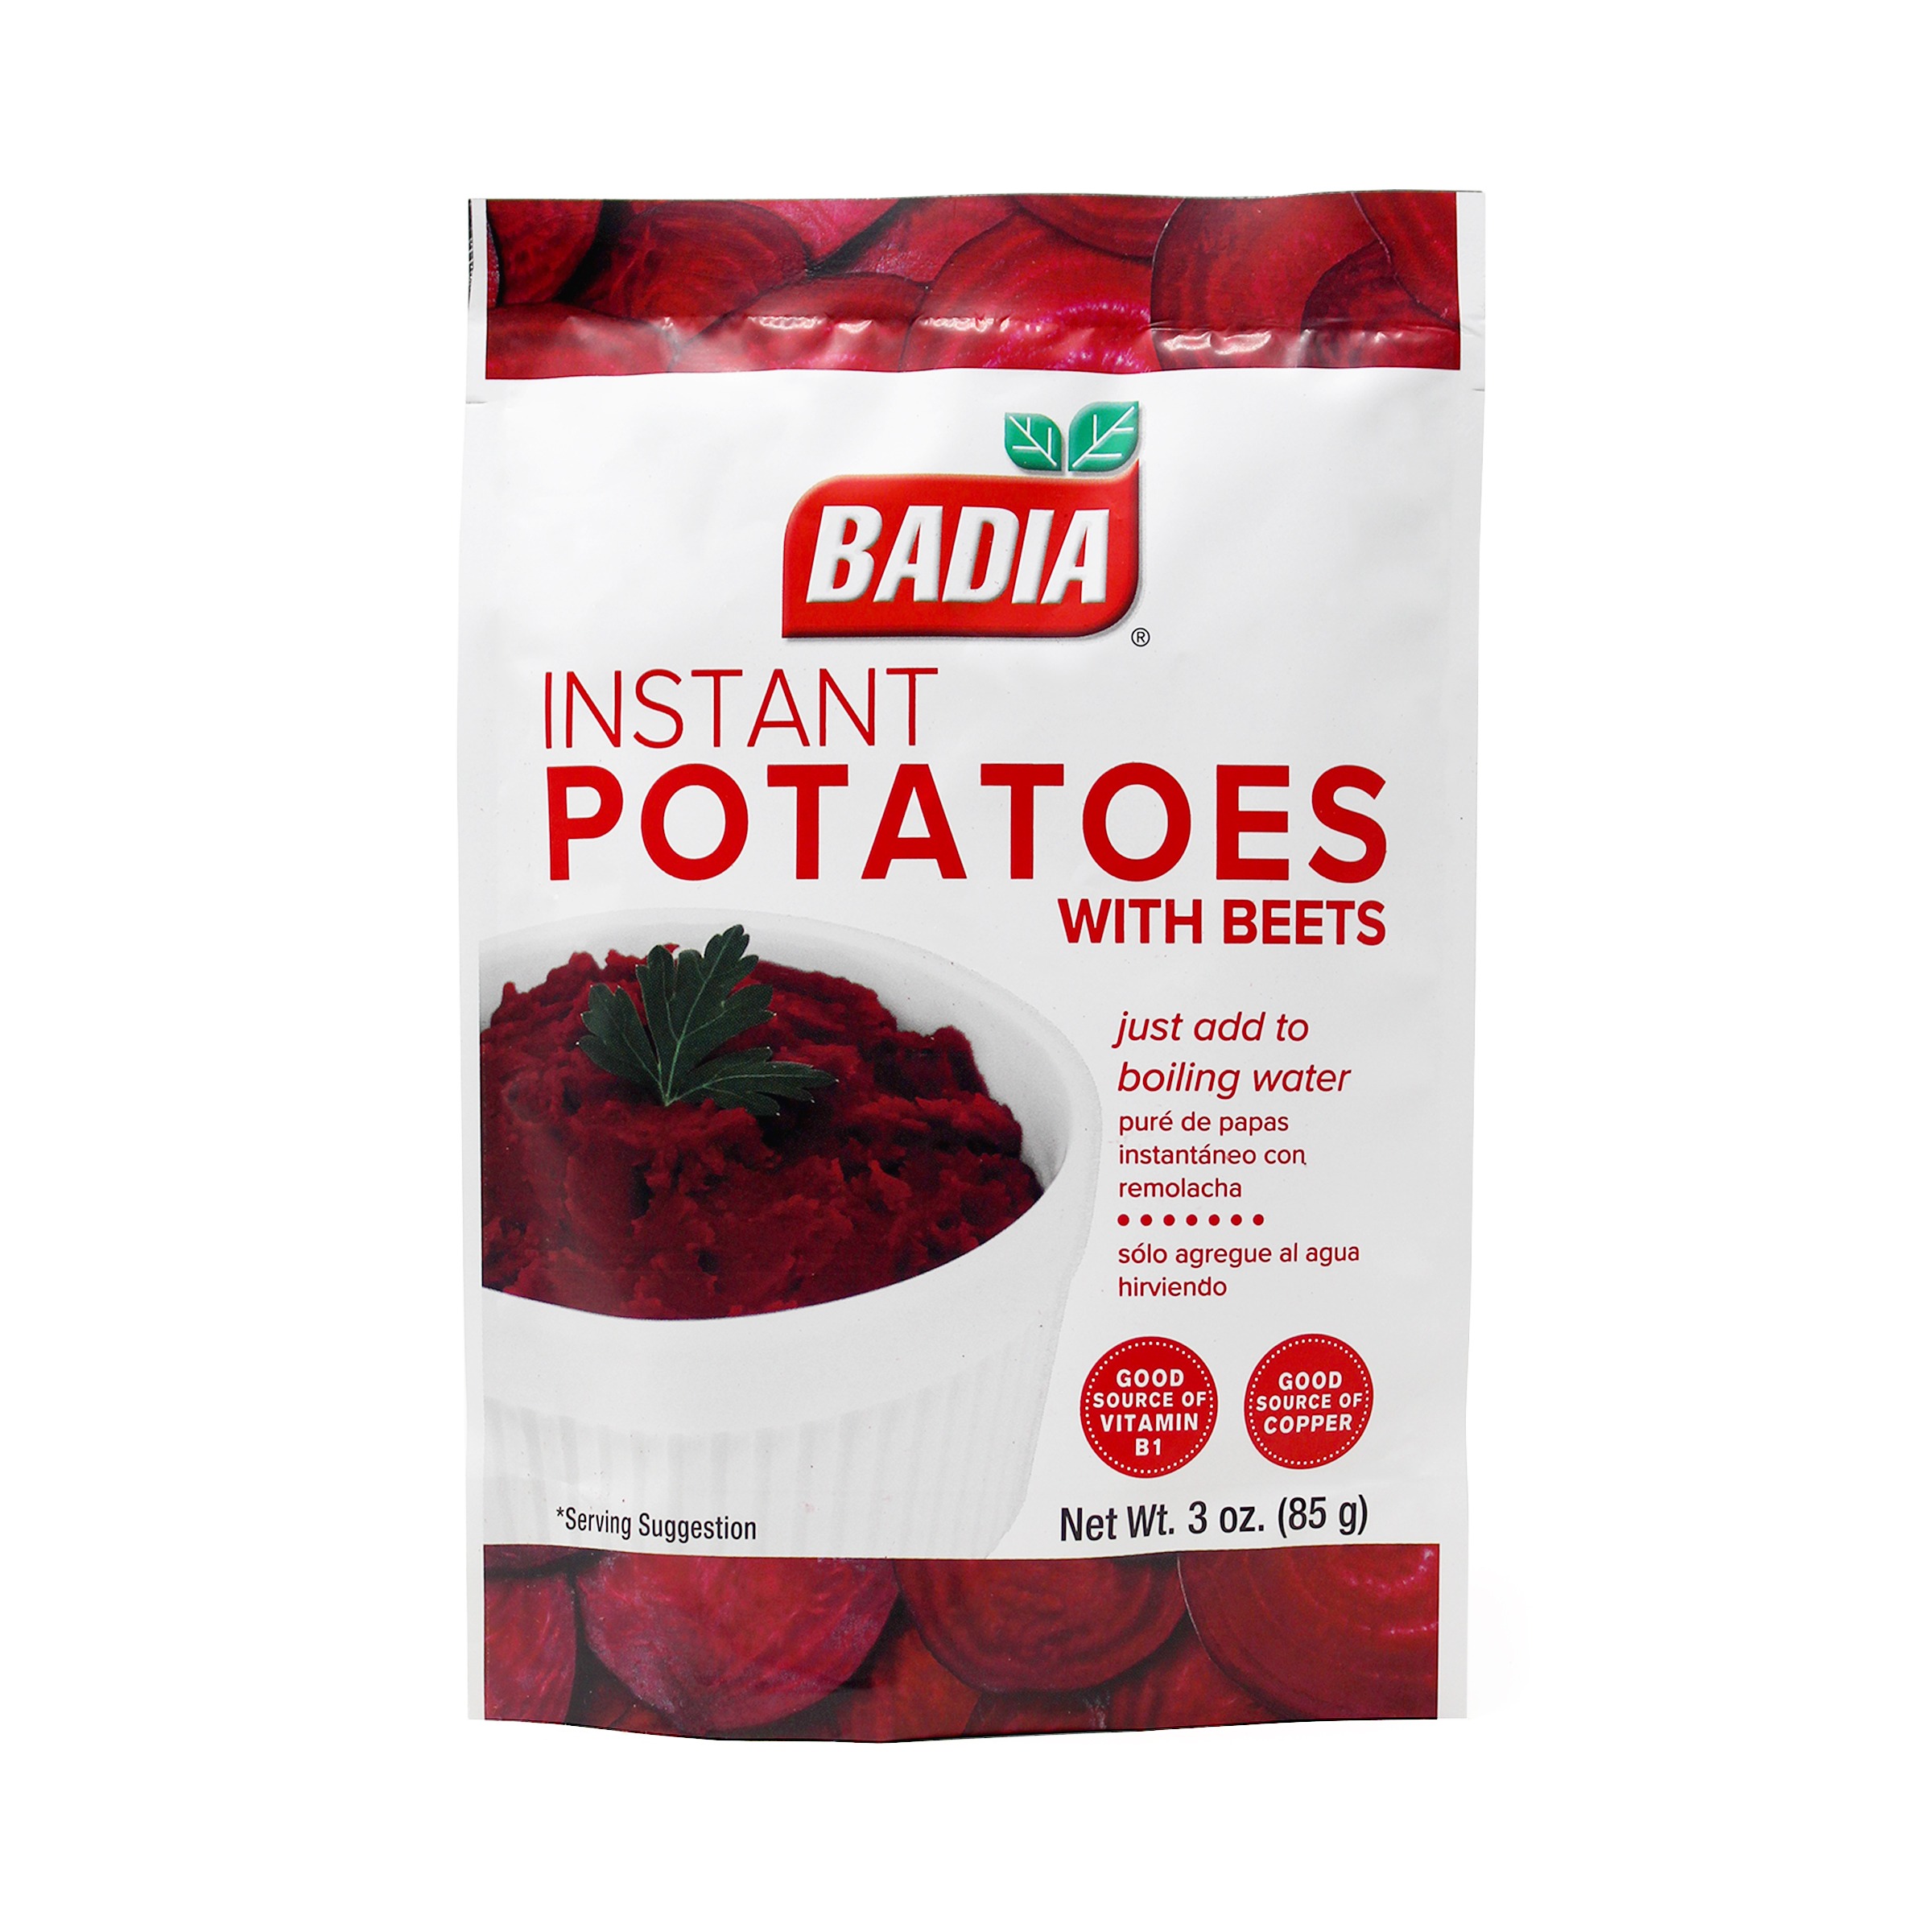 Badia Instant Potatoes with Beets 3 0z